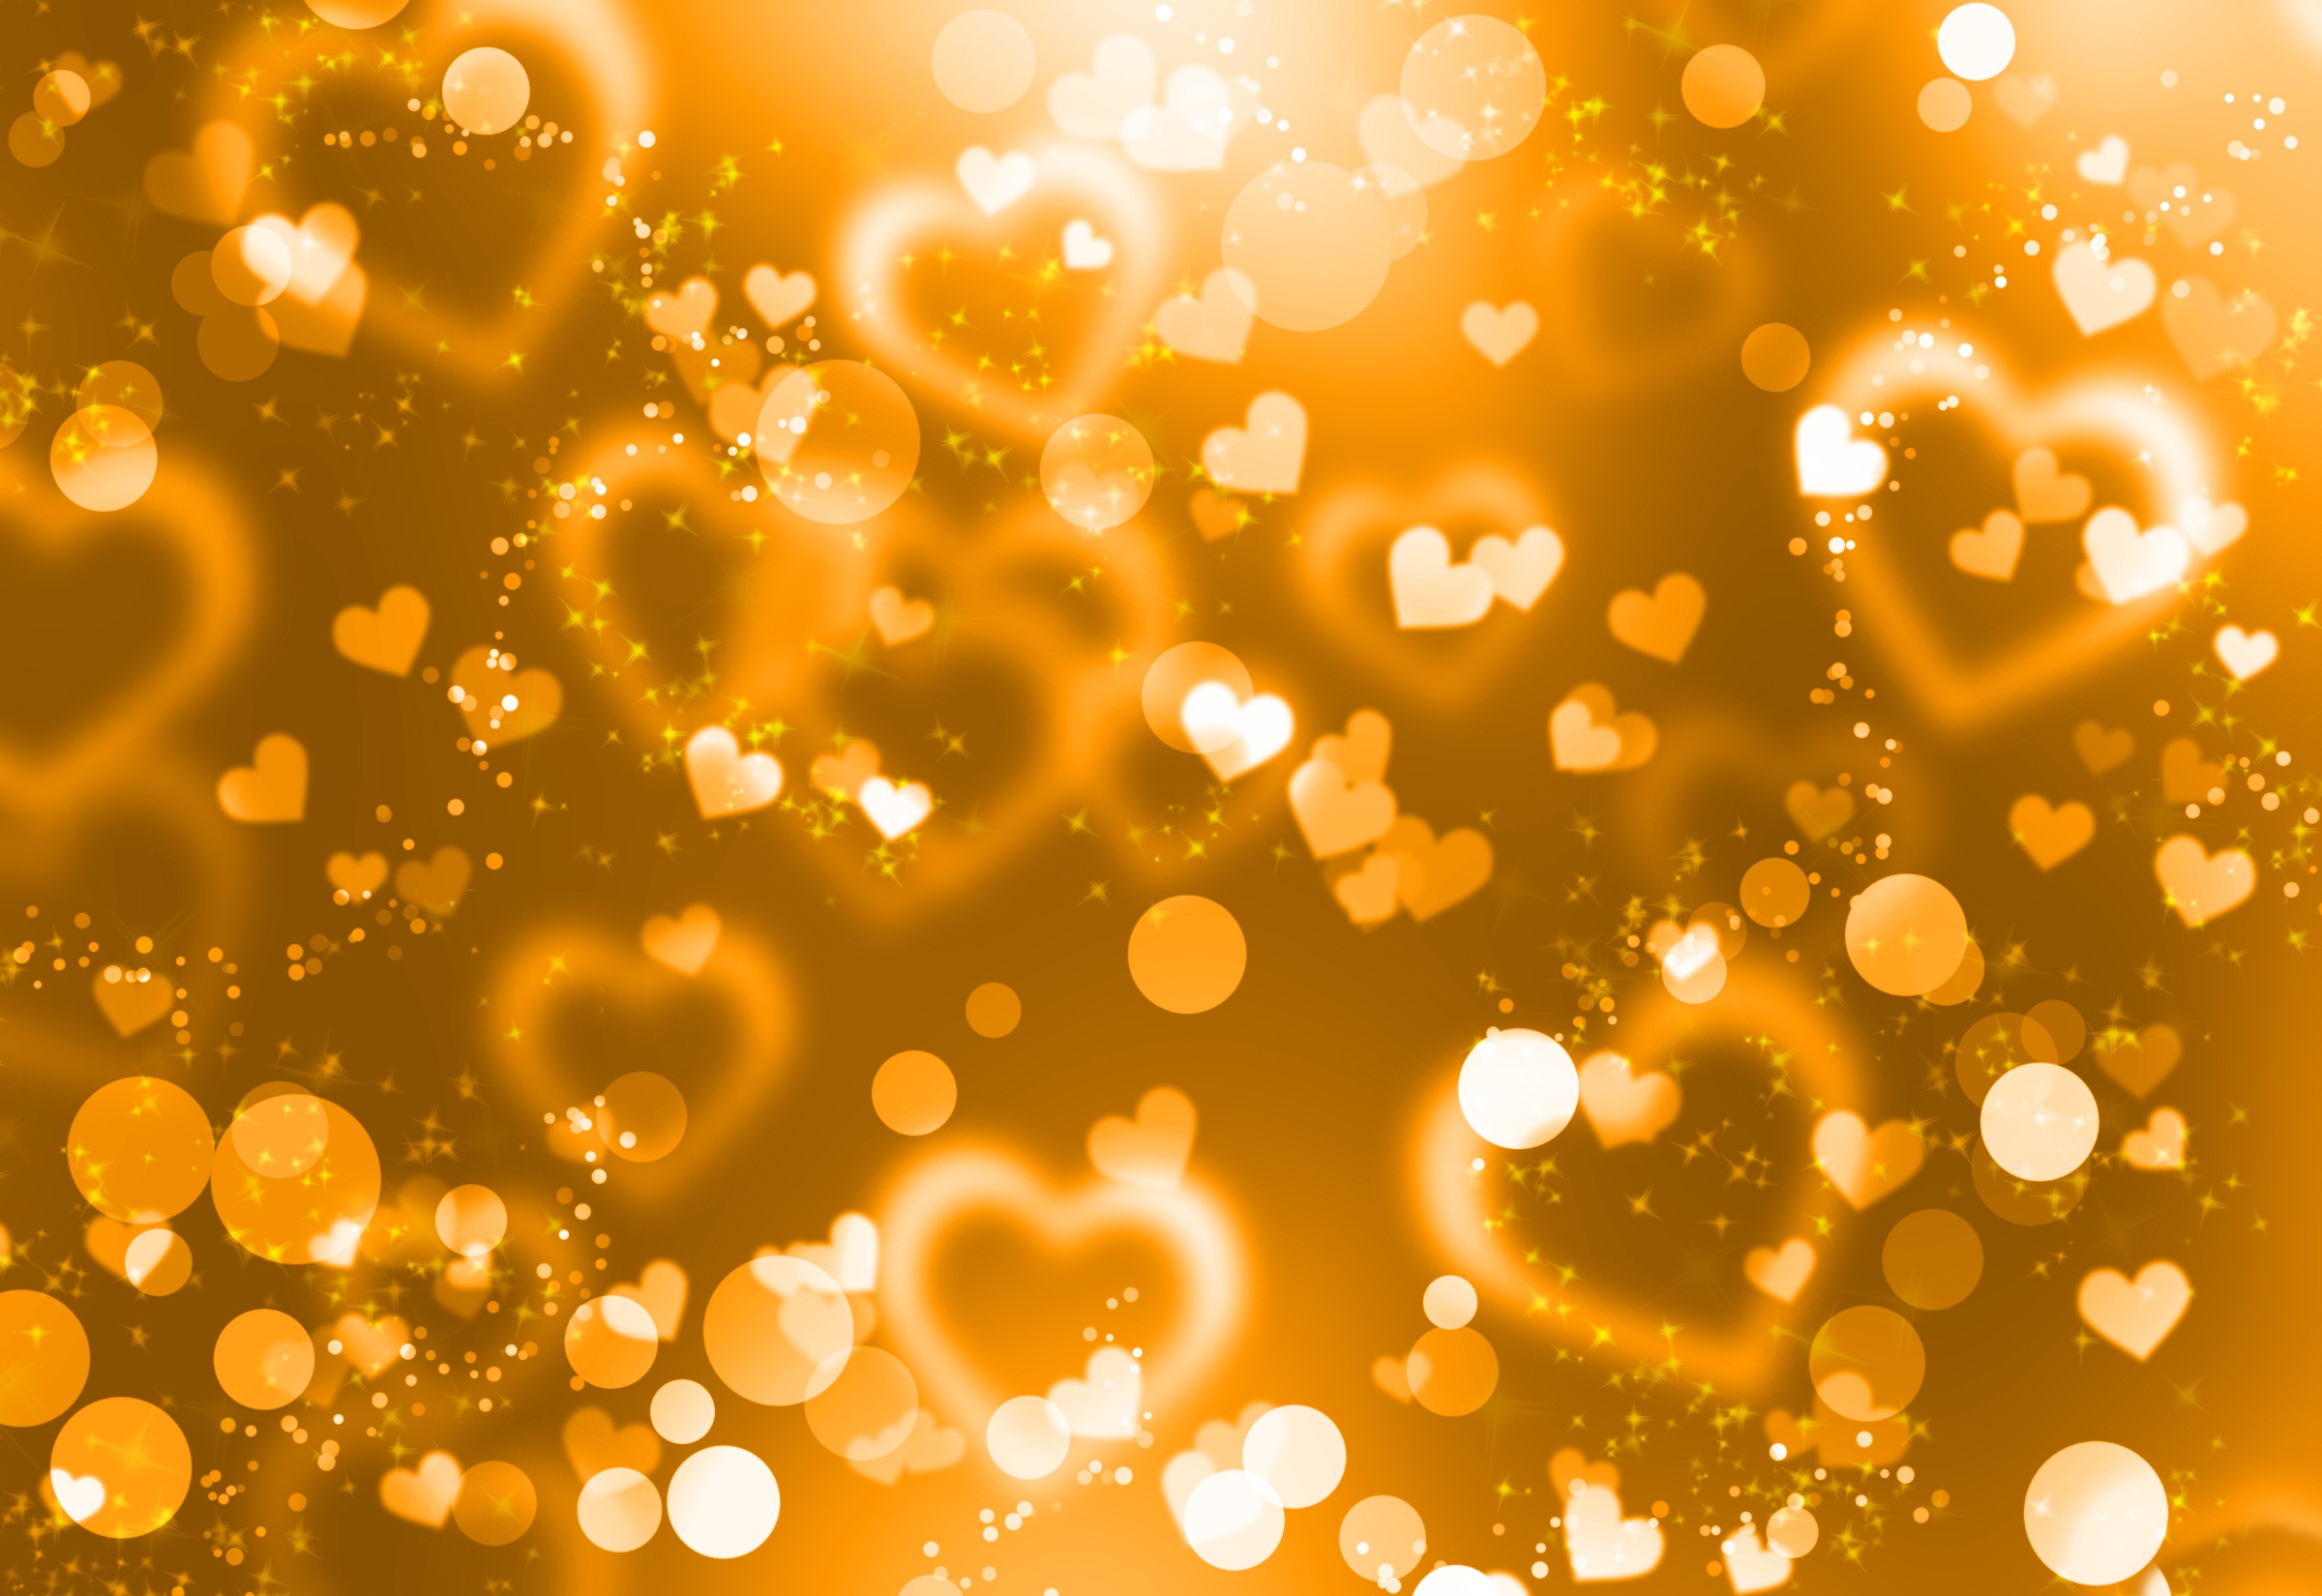 Gold Wallpapers hearts